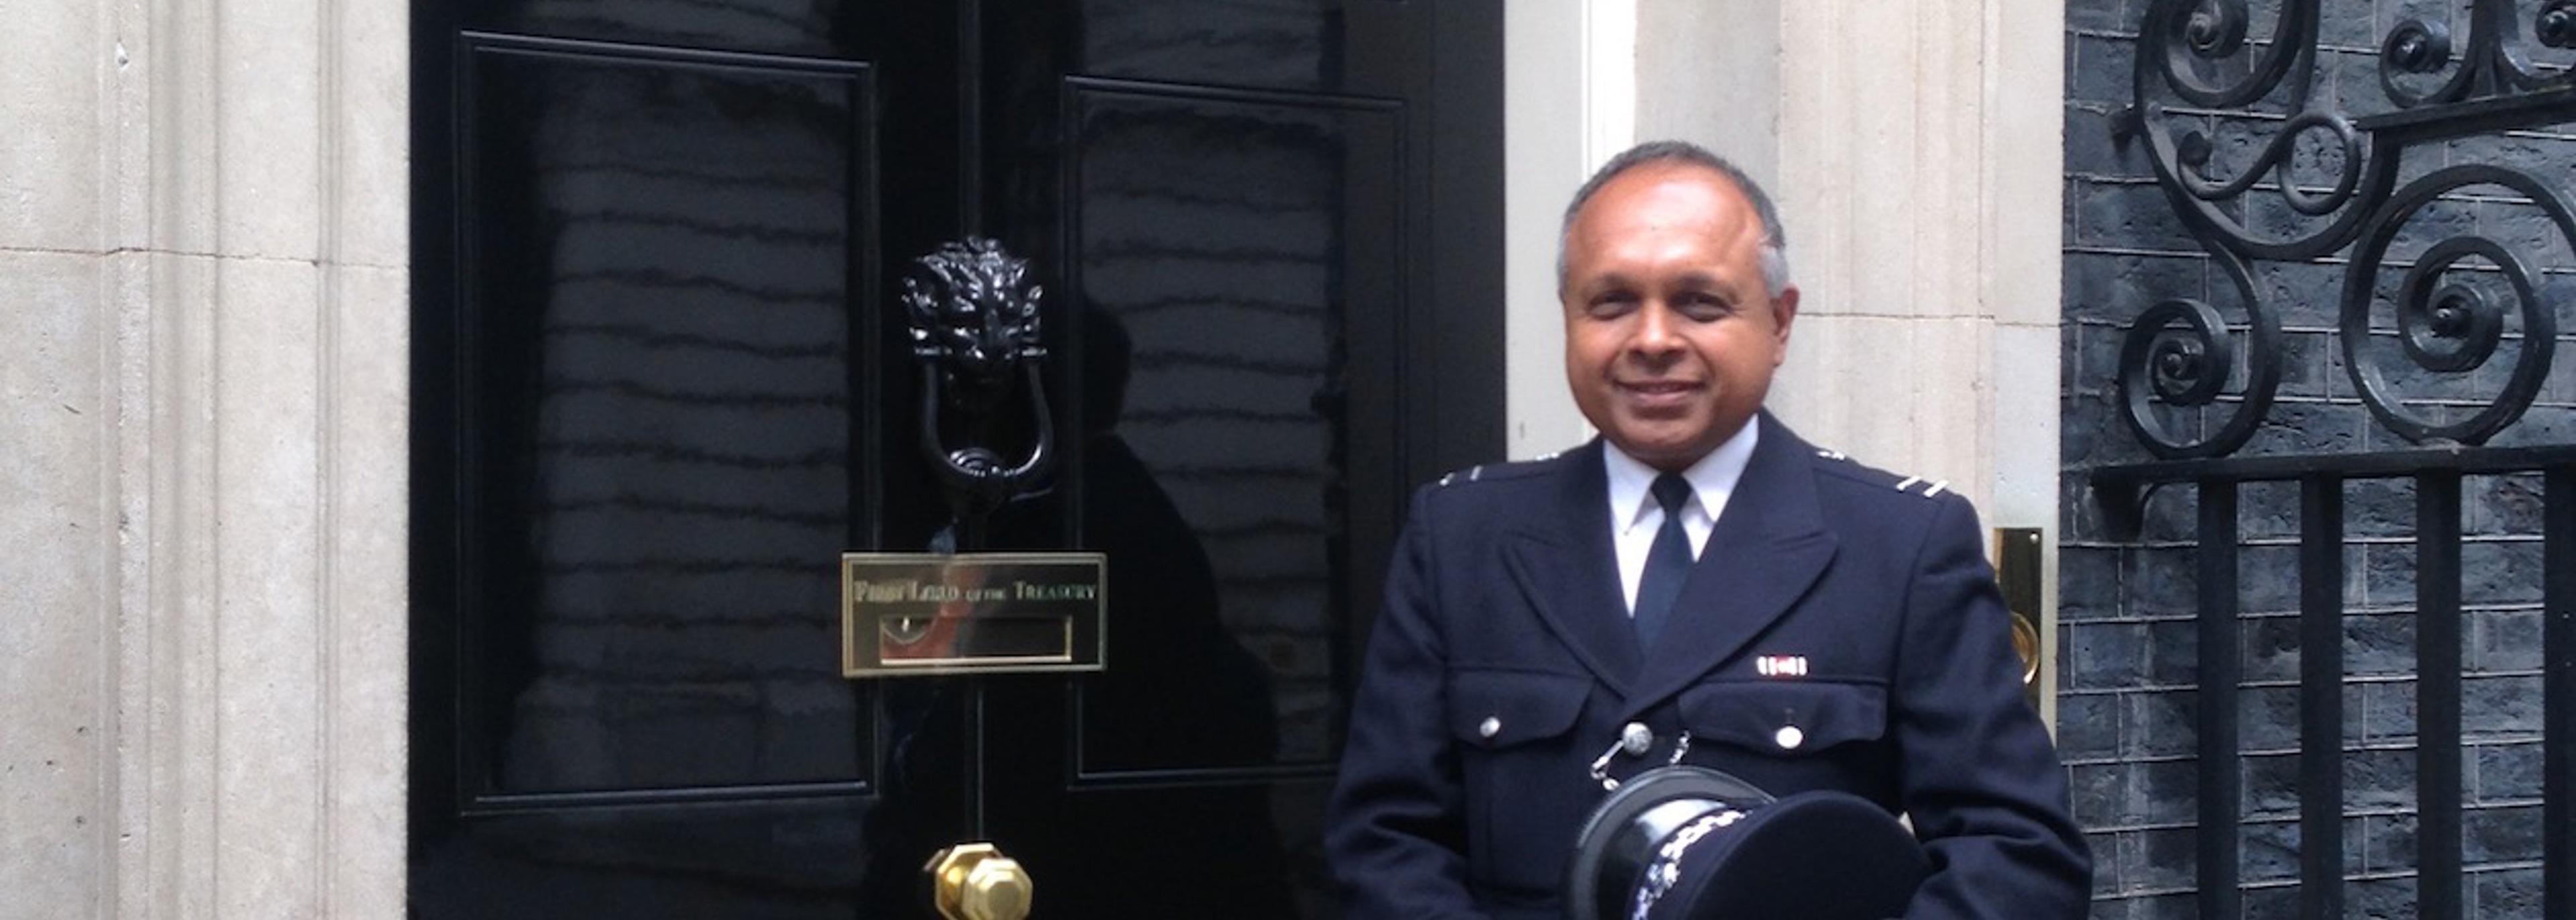 EHP named in New Year Honours list for services to policing